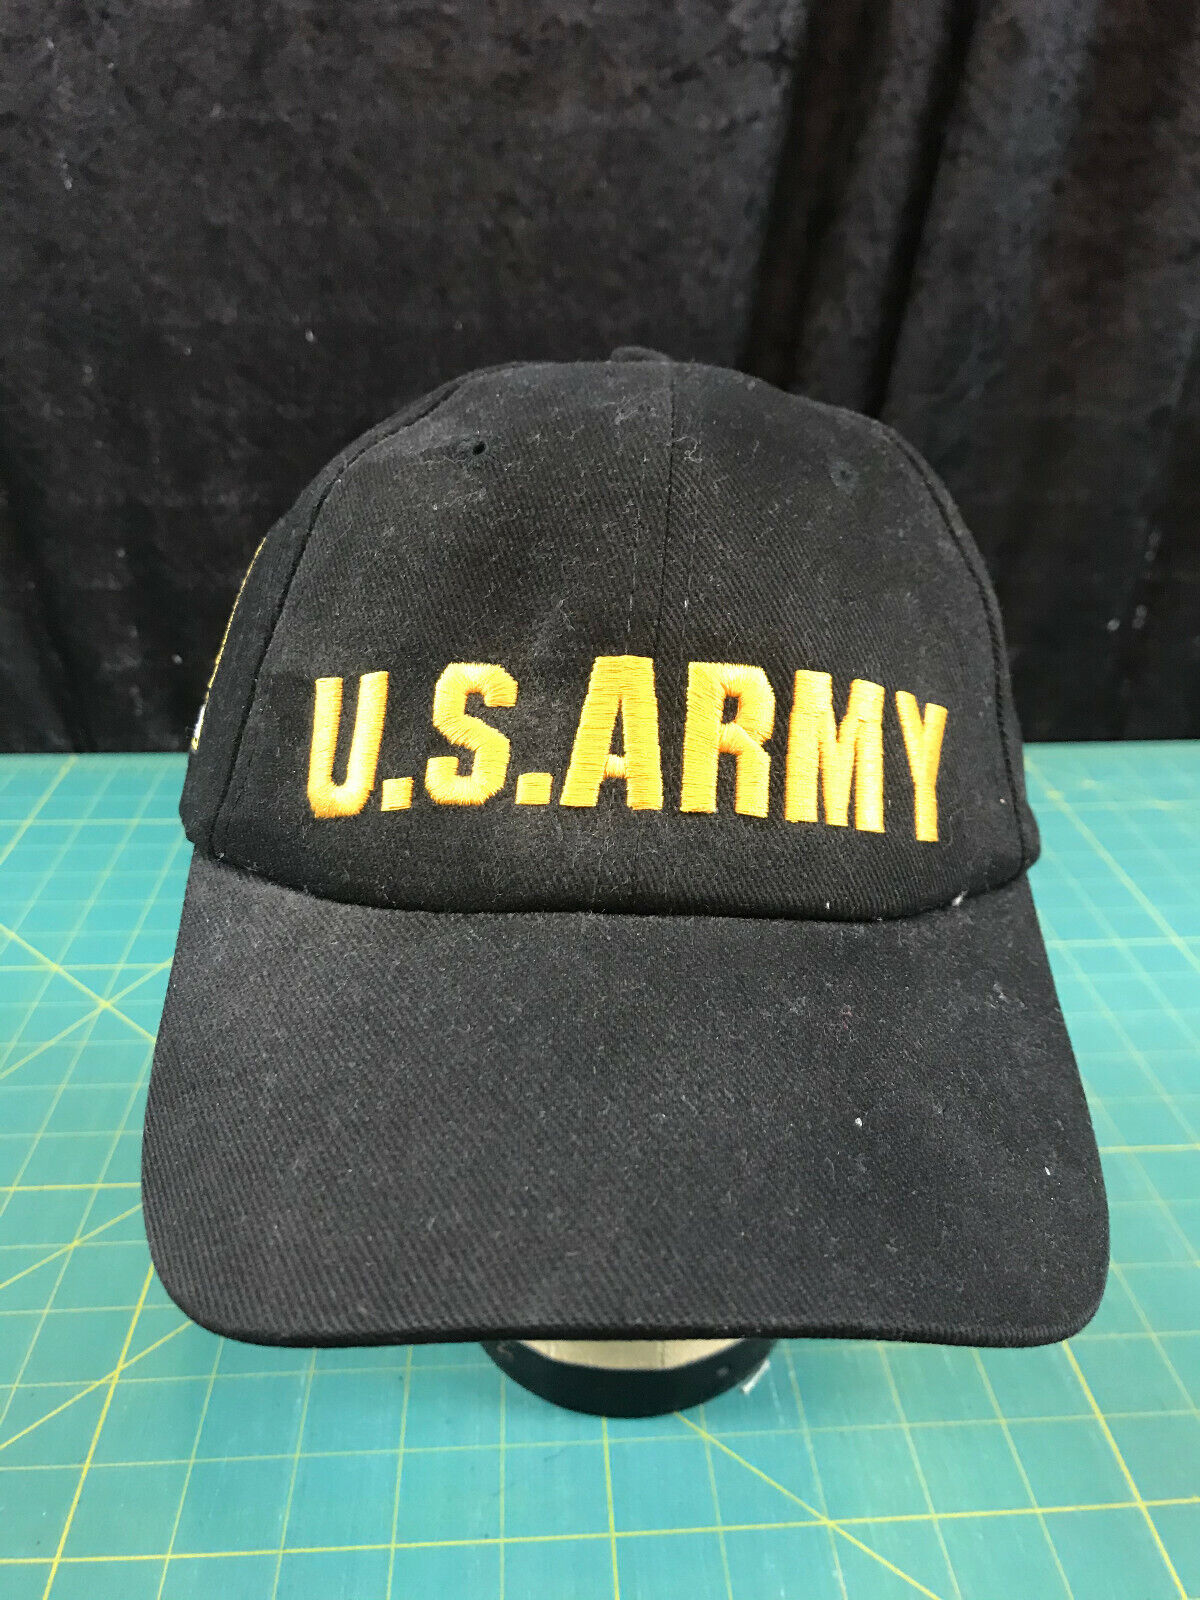 MRL Sports U.S. Army One Size Baseball Hat w/ Button Activated Army Jingle